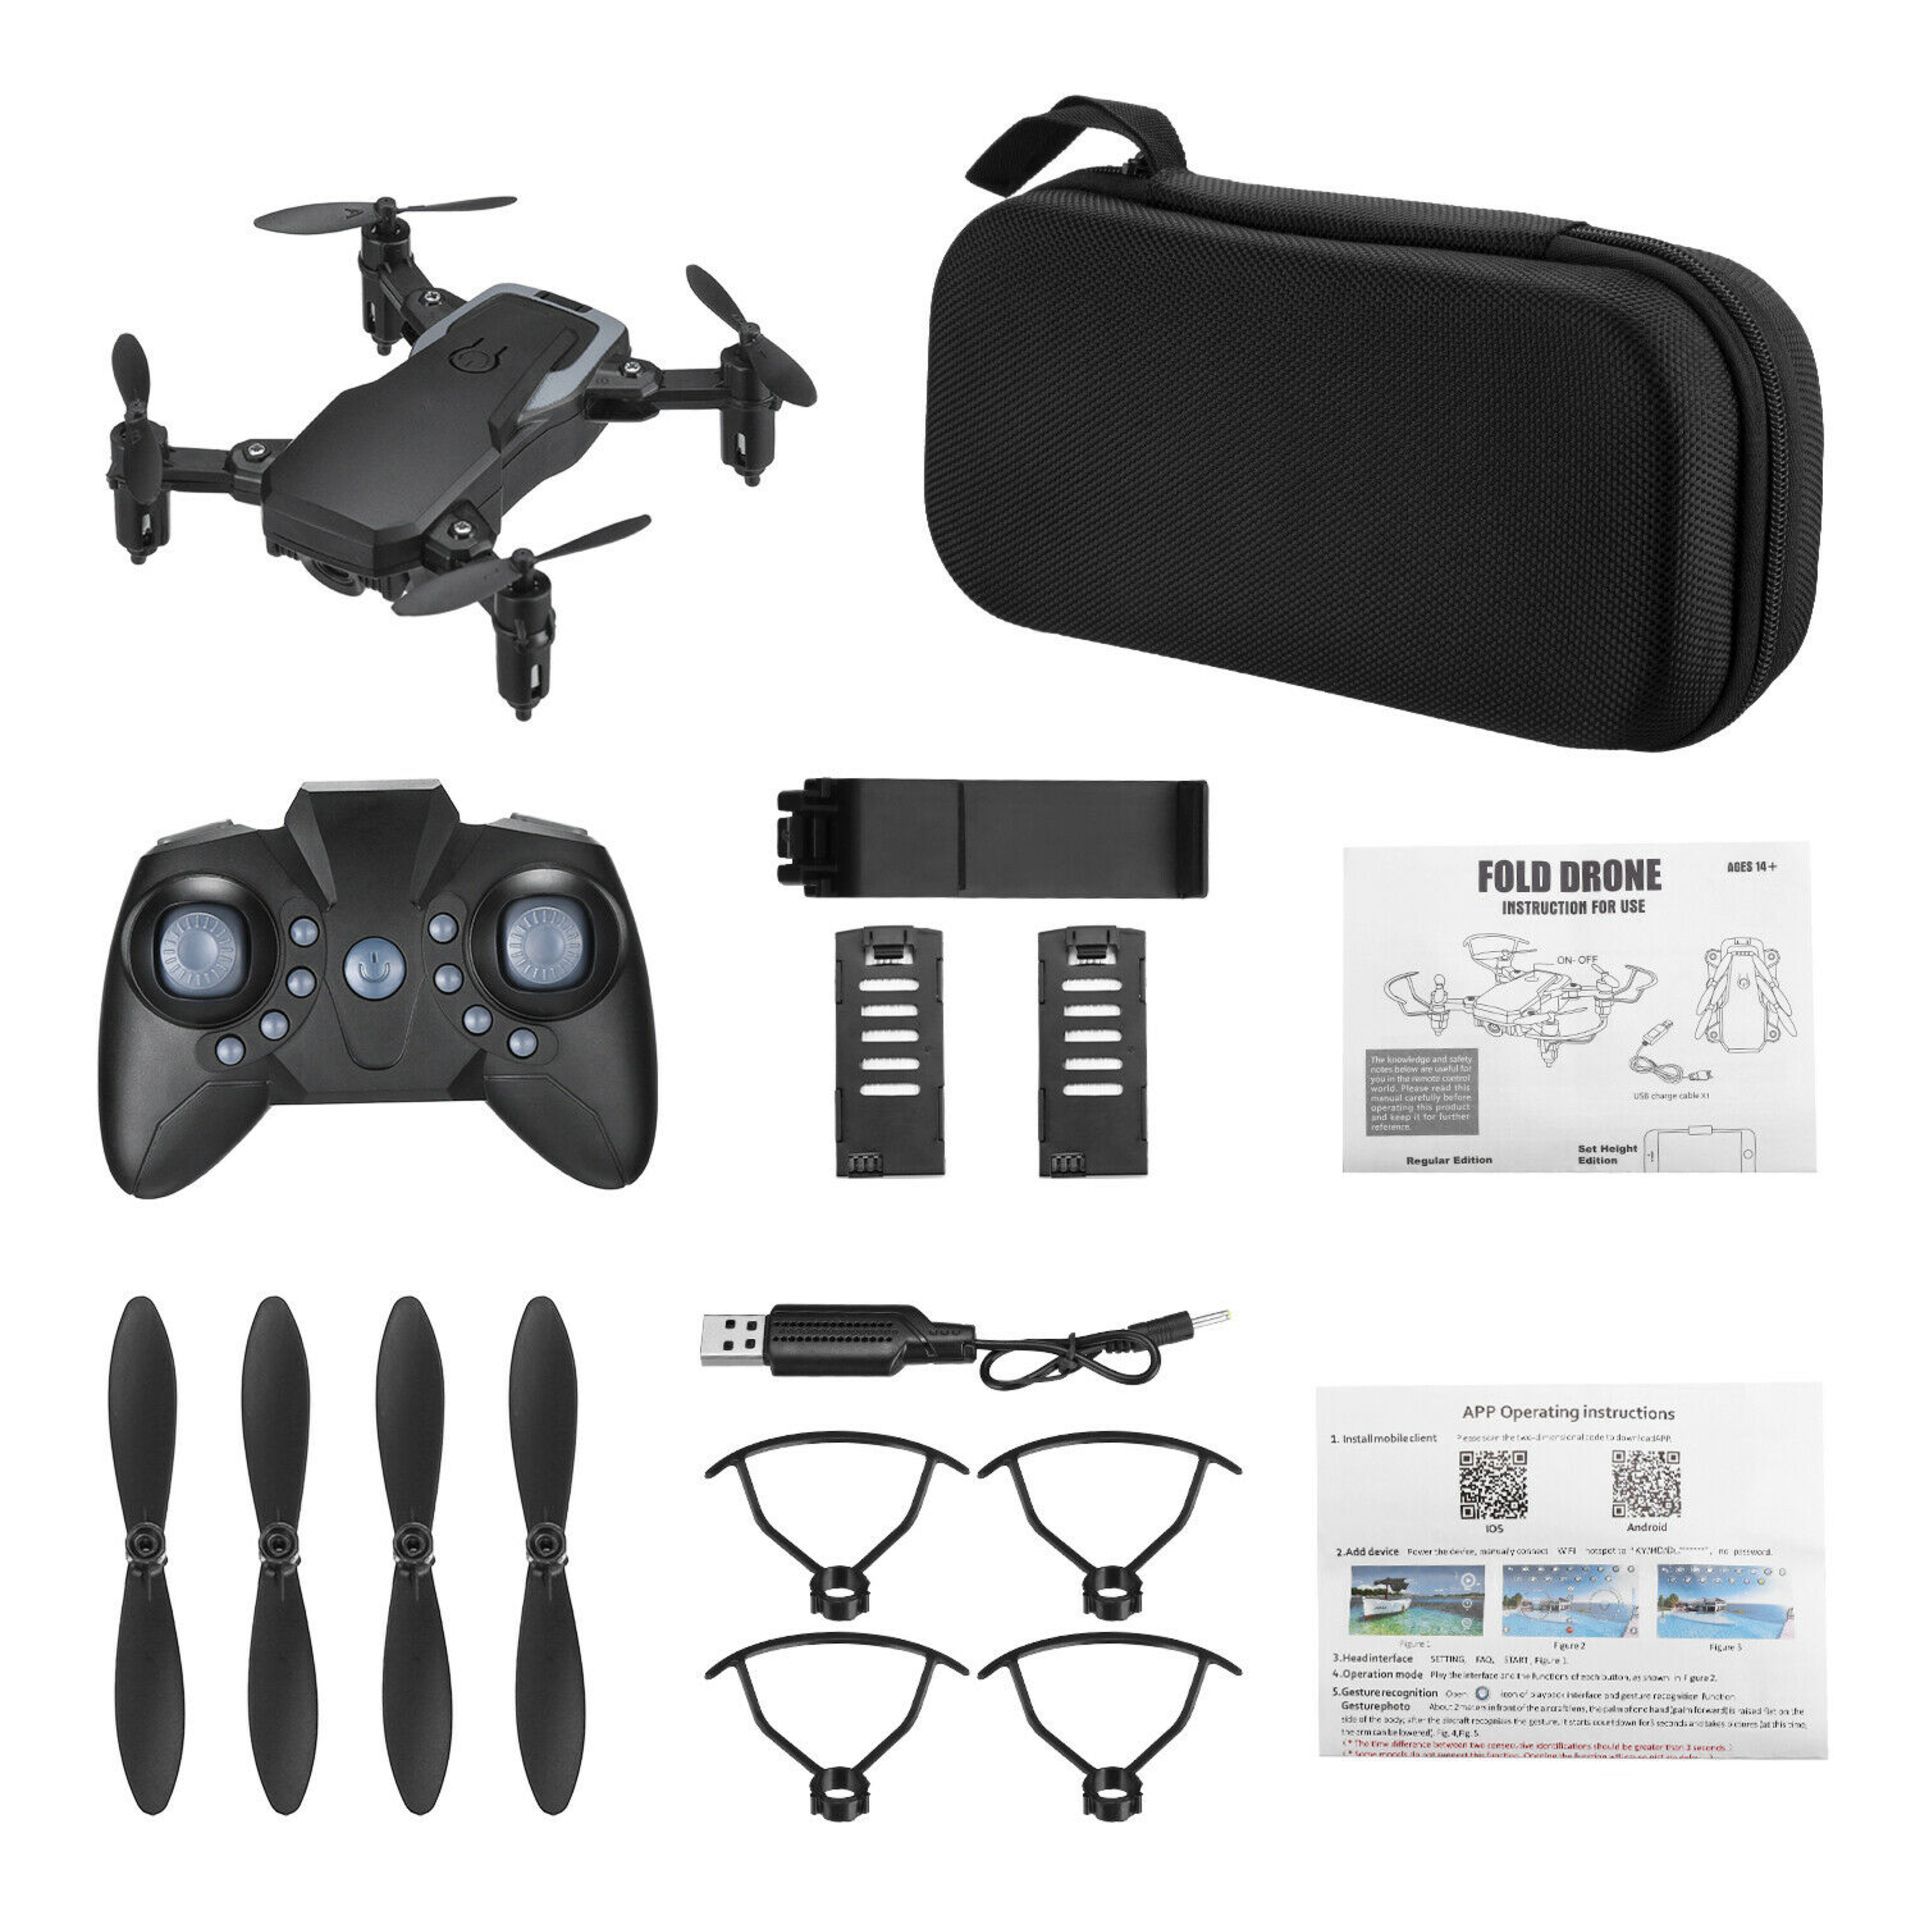 NEW & UNUSED DRONE X PRO WIFI FPV 4K HD CAMERA FOLDABLE RC QUADCOPTER + CASE/ BAG *NO VAT* - Image 2 of 8